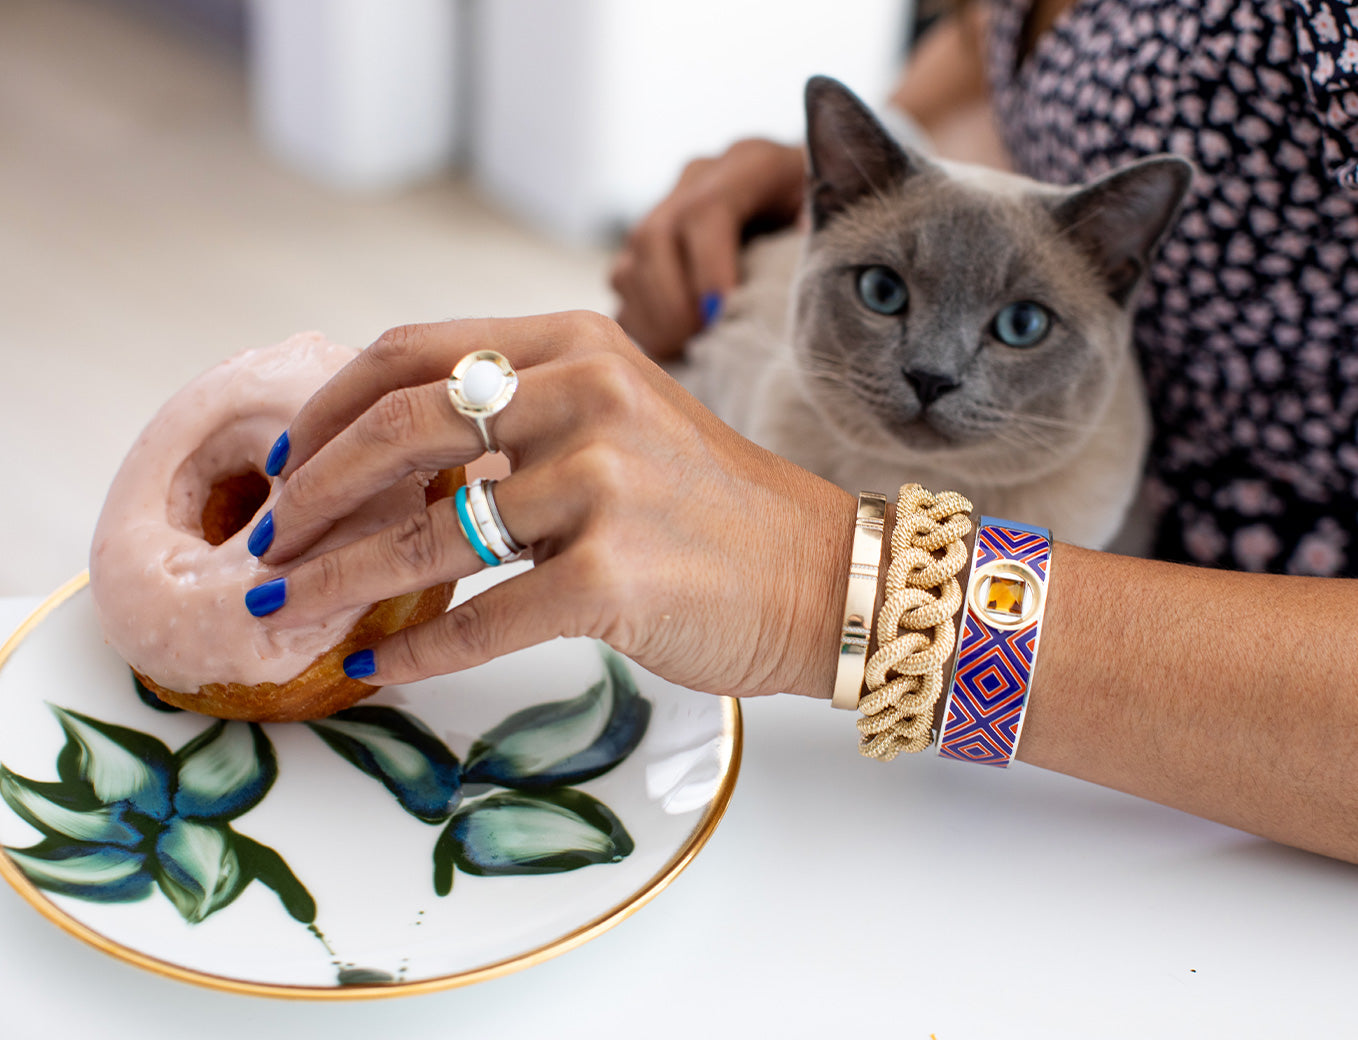 Gina wearing Cast Jewelry with her Cat